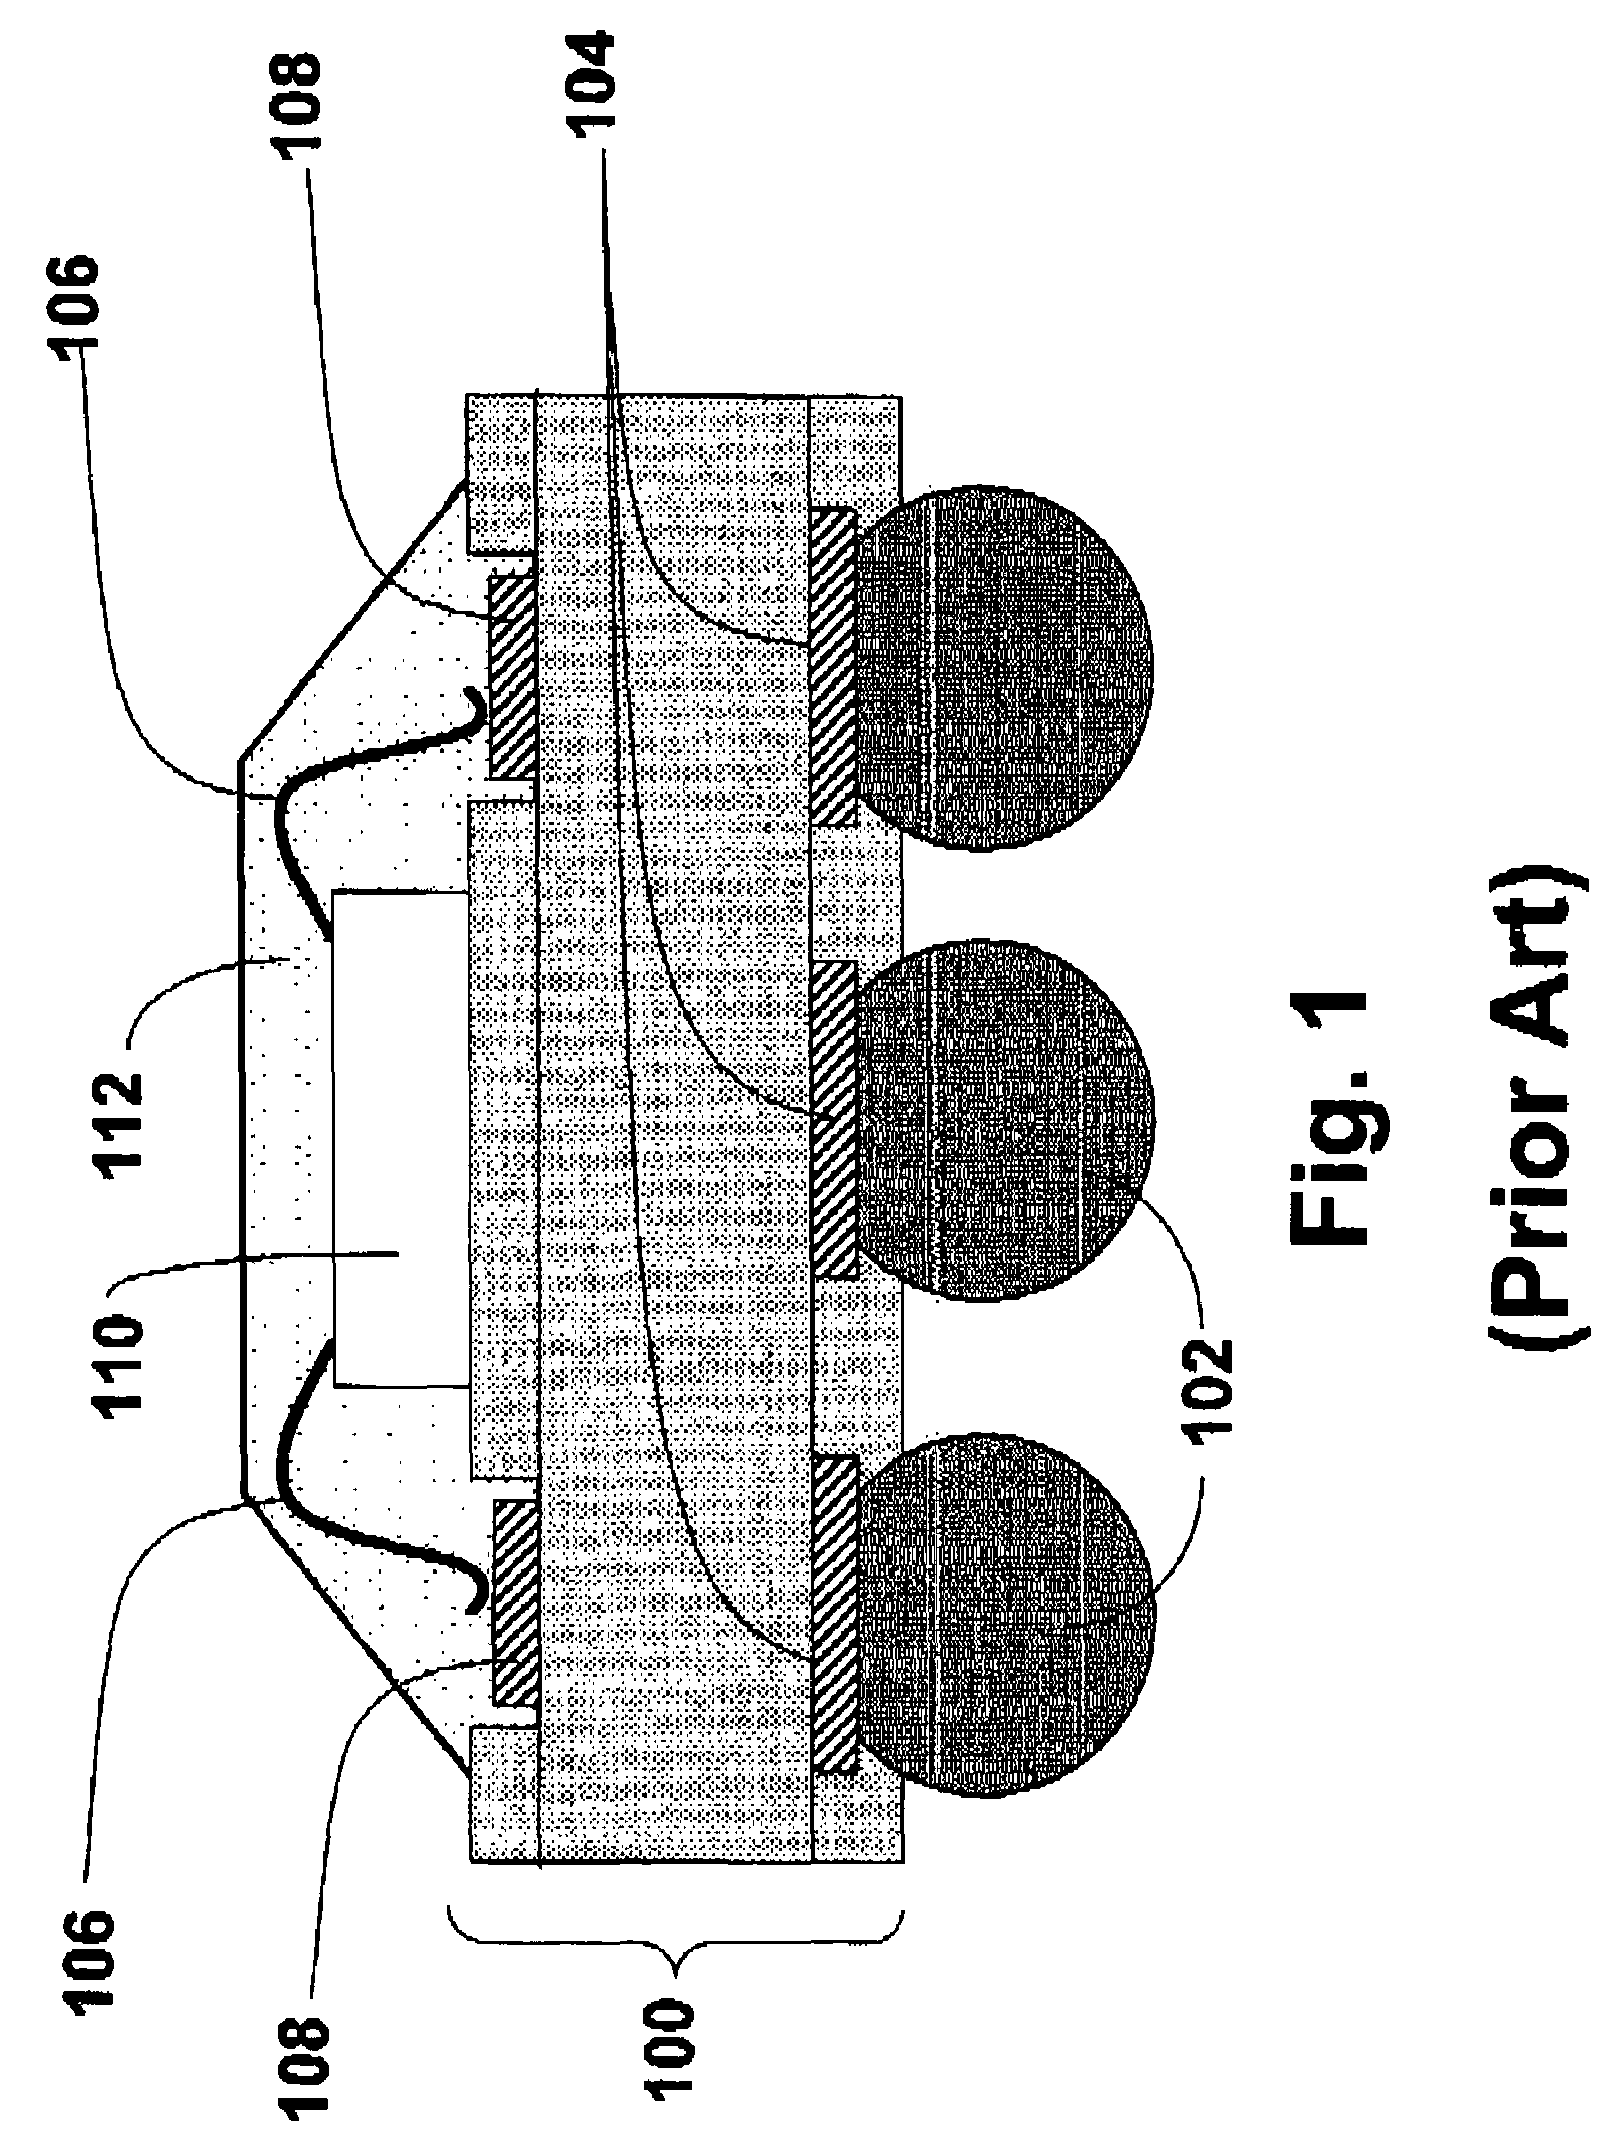 Integrated circuit support structures and their fabrication